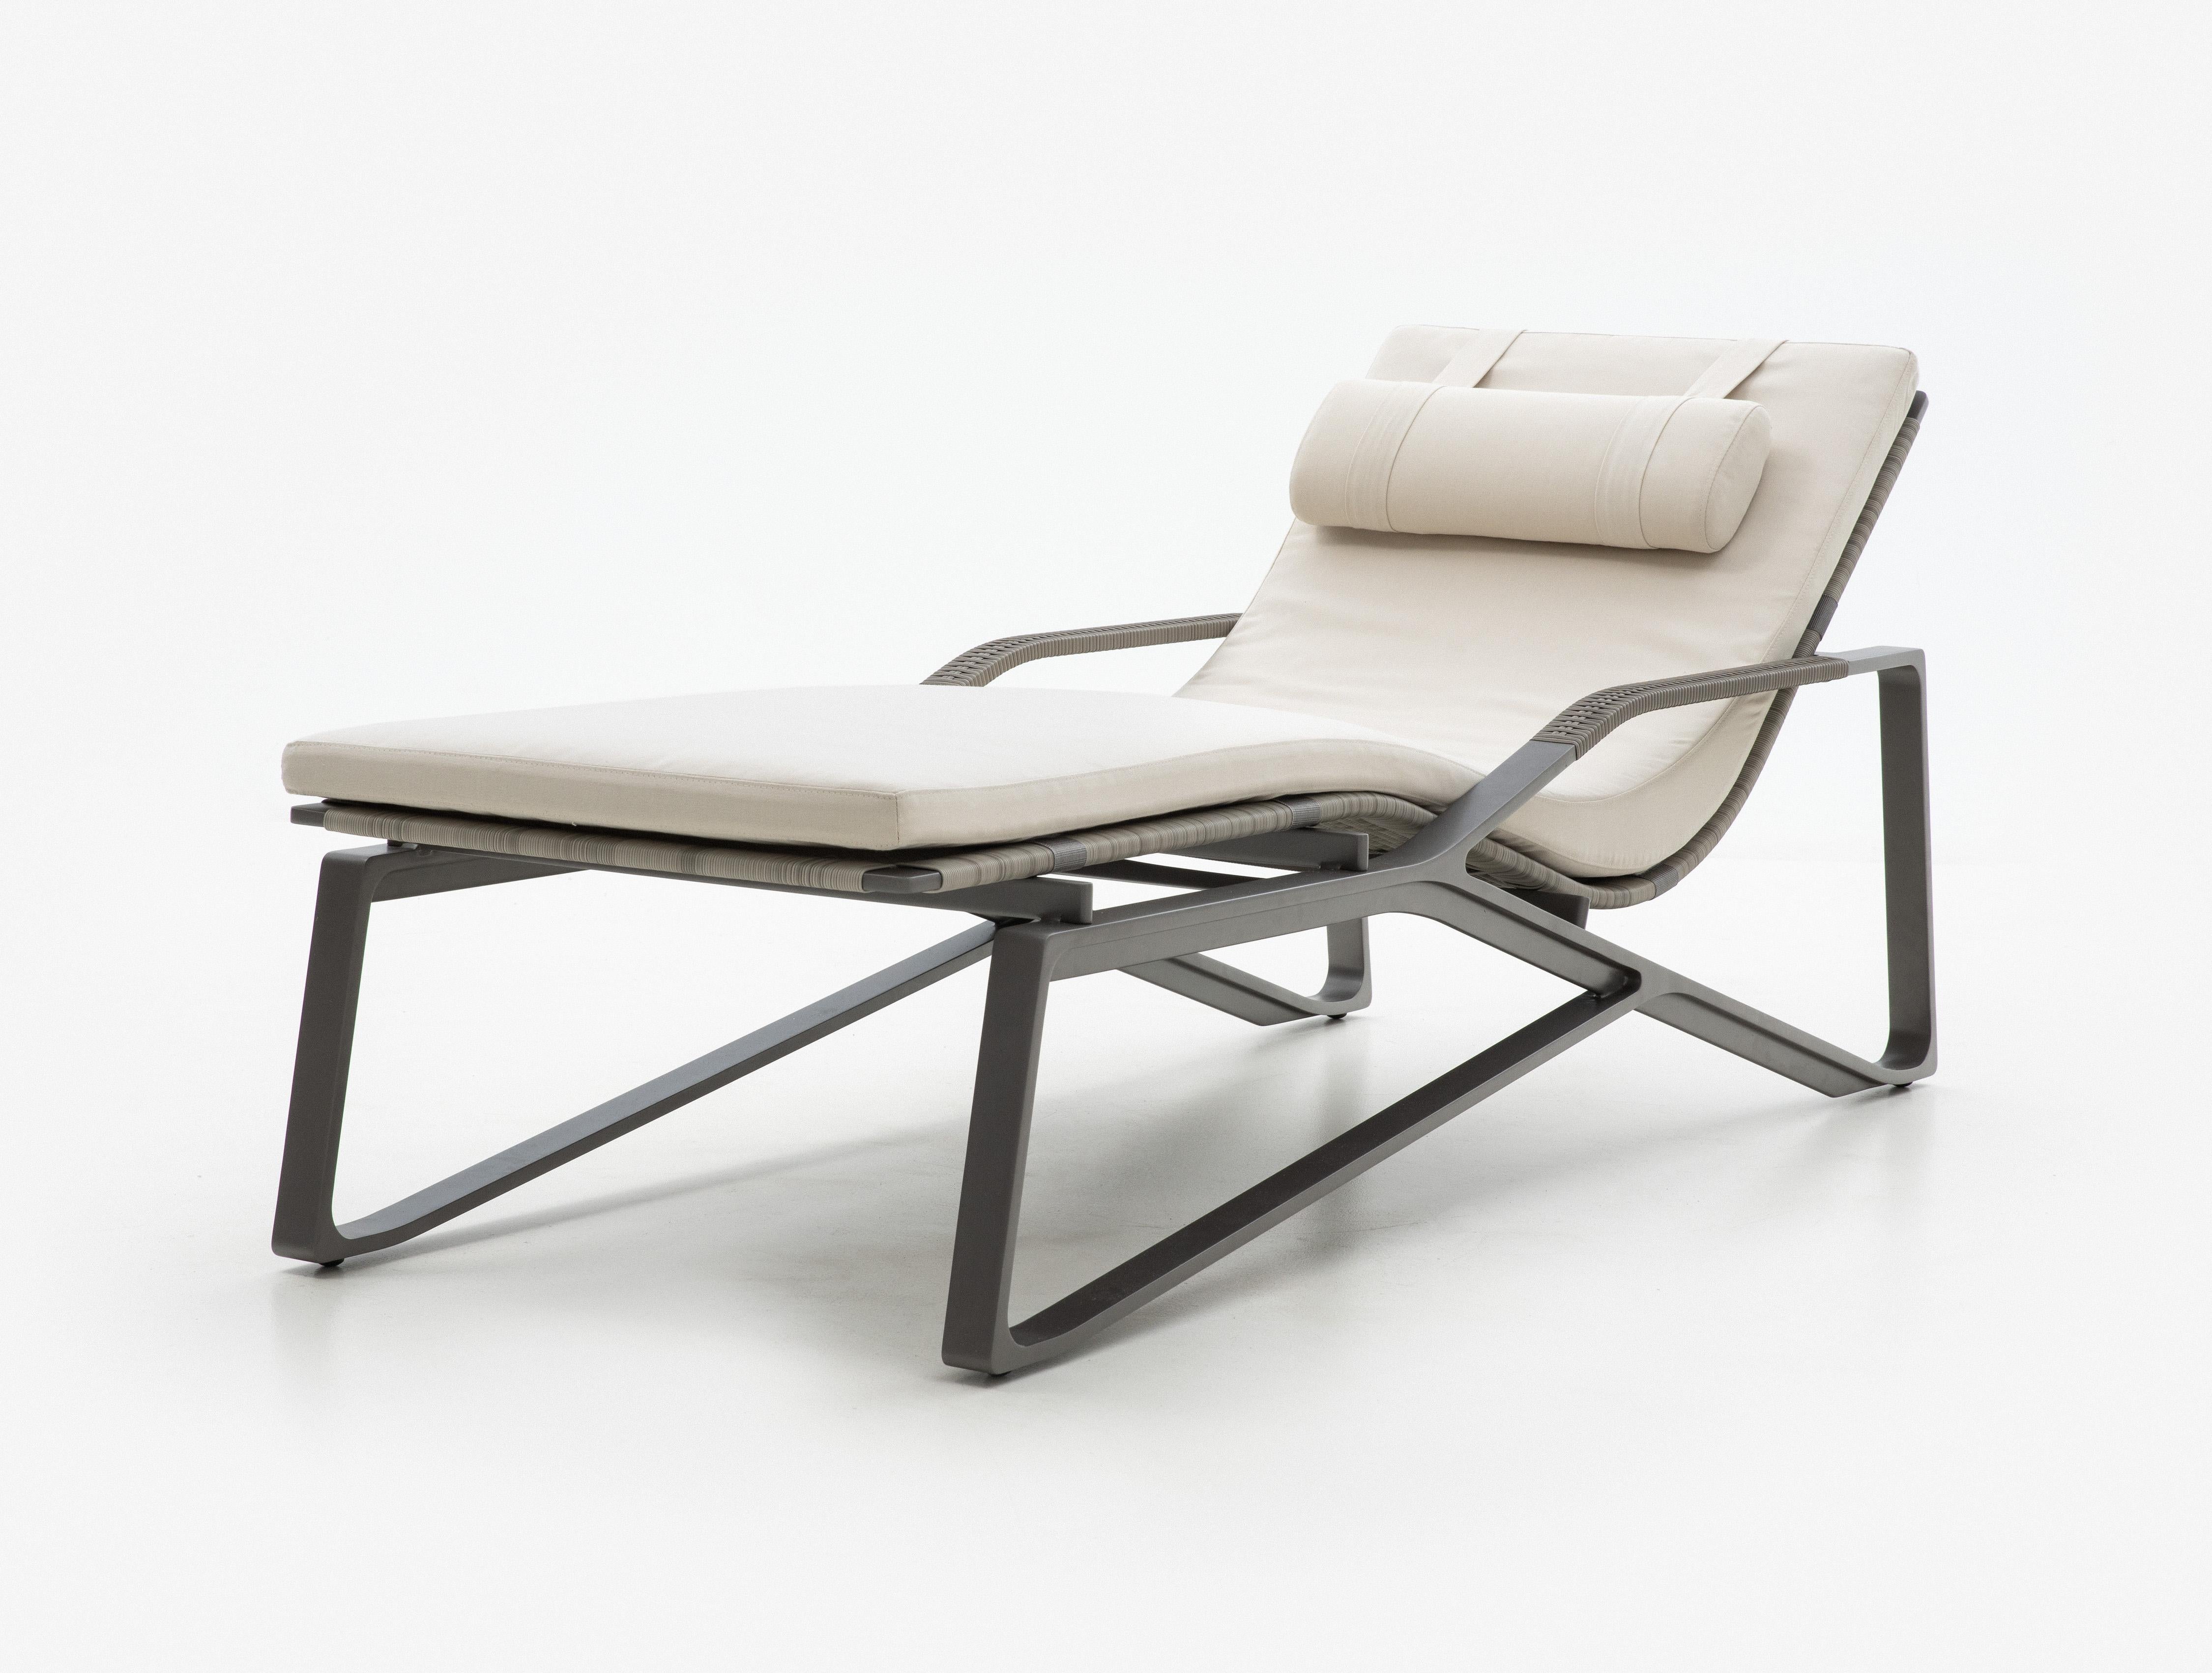 Modern HOLLY HUNT Outdoor Moray Chaise with Oyster Base Finish and Sand Color Canvas